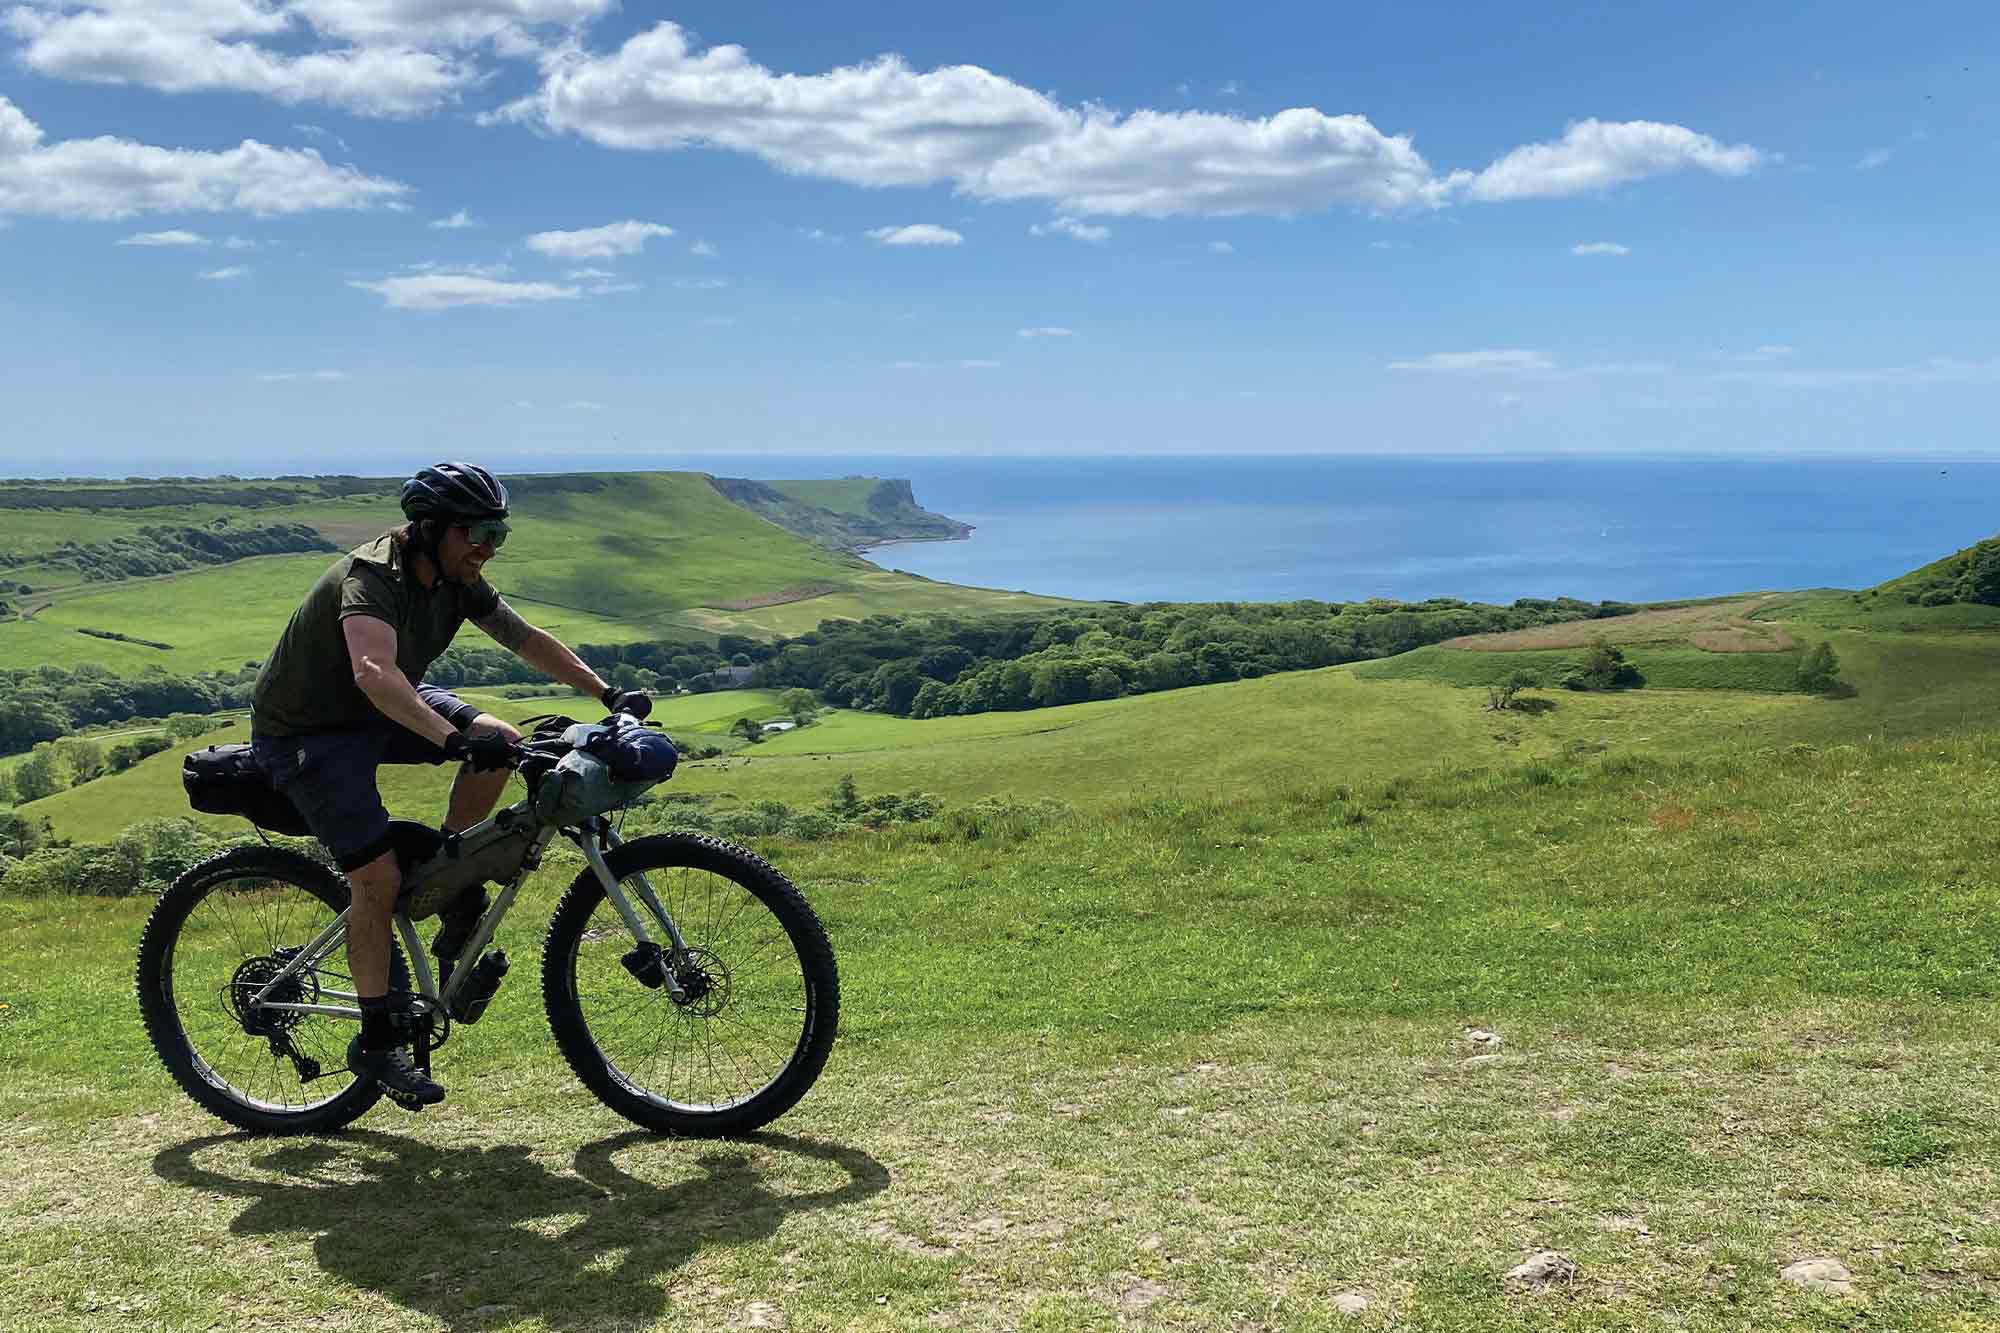 Cyclist w/ bikepacking bags riding grassy hills on sunny day with shoreline in distance